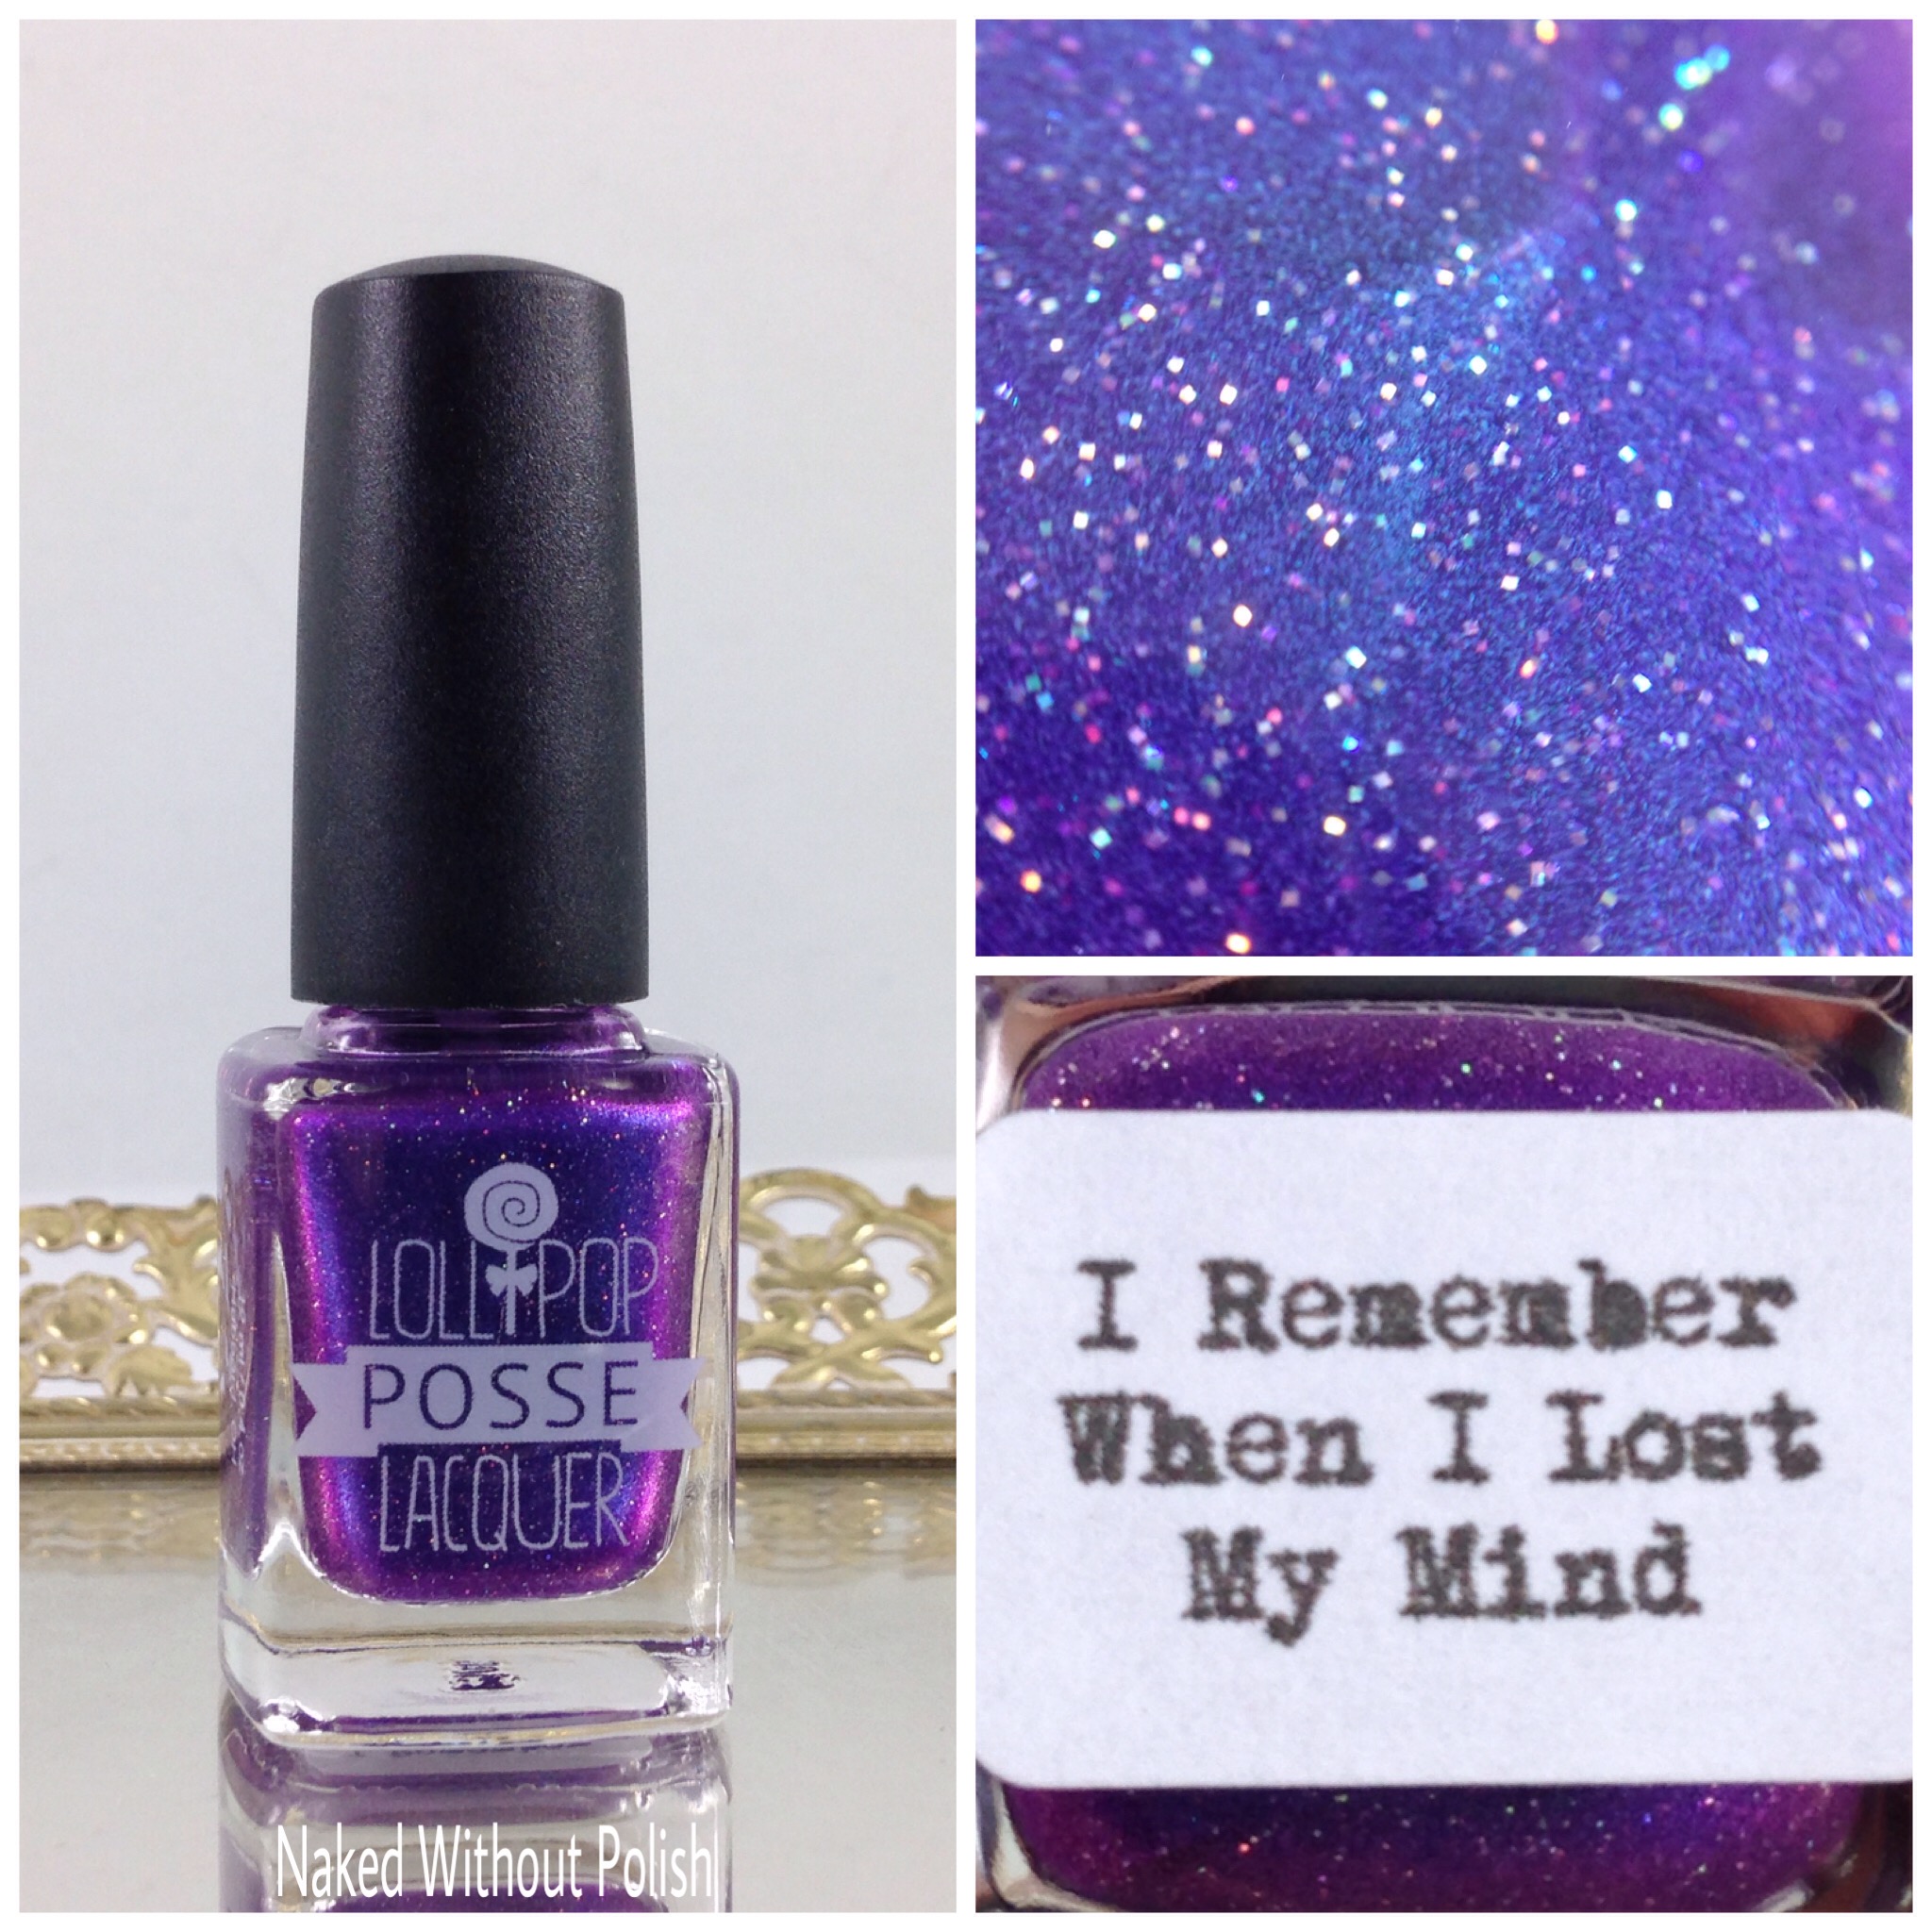 Lollipop-Posse-Lacquer-I-Remember-When-I-Lost-My-Mind-1